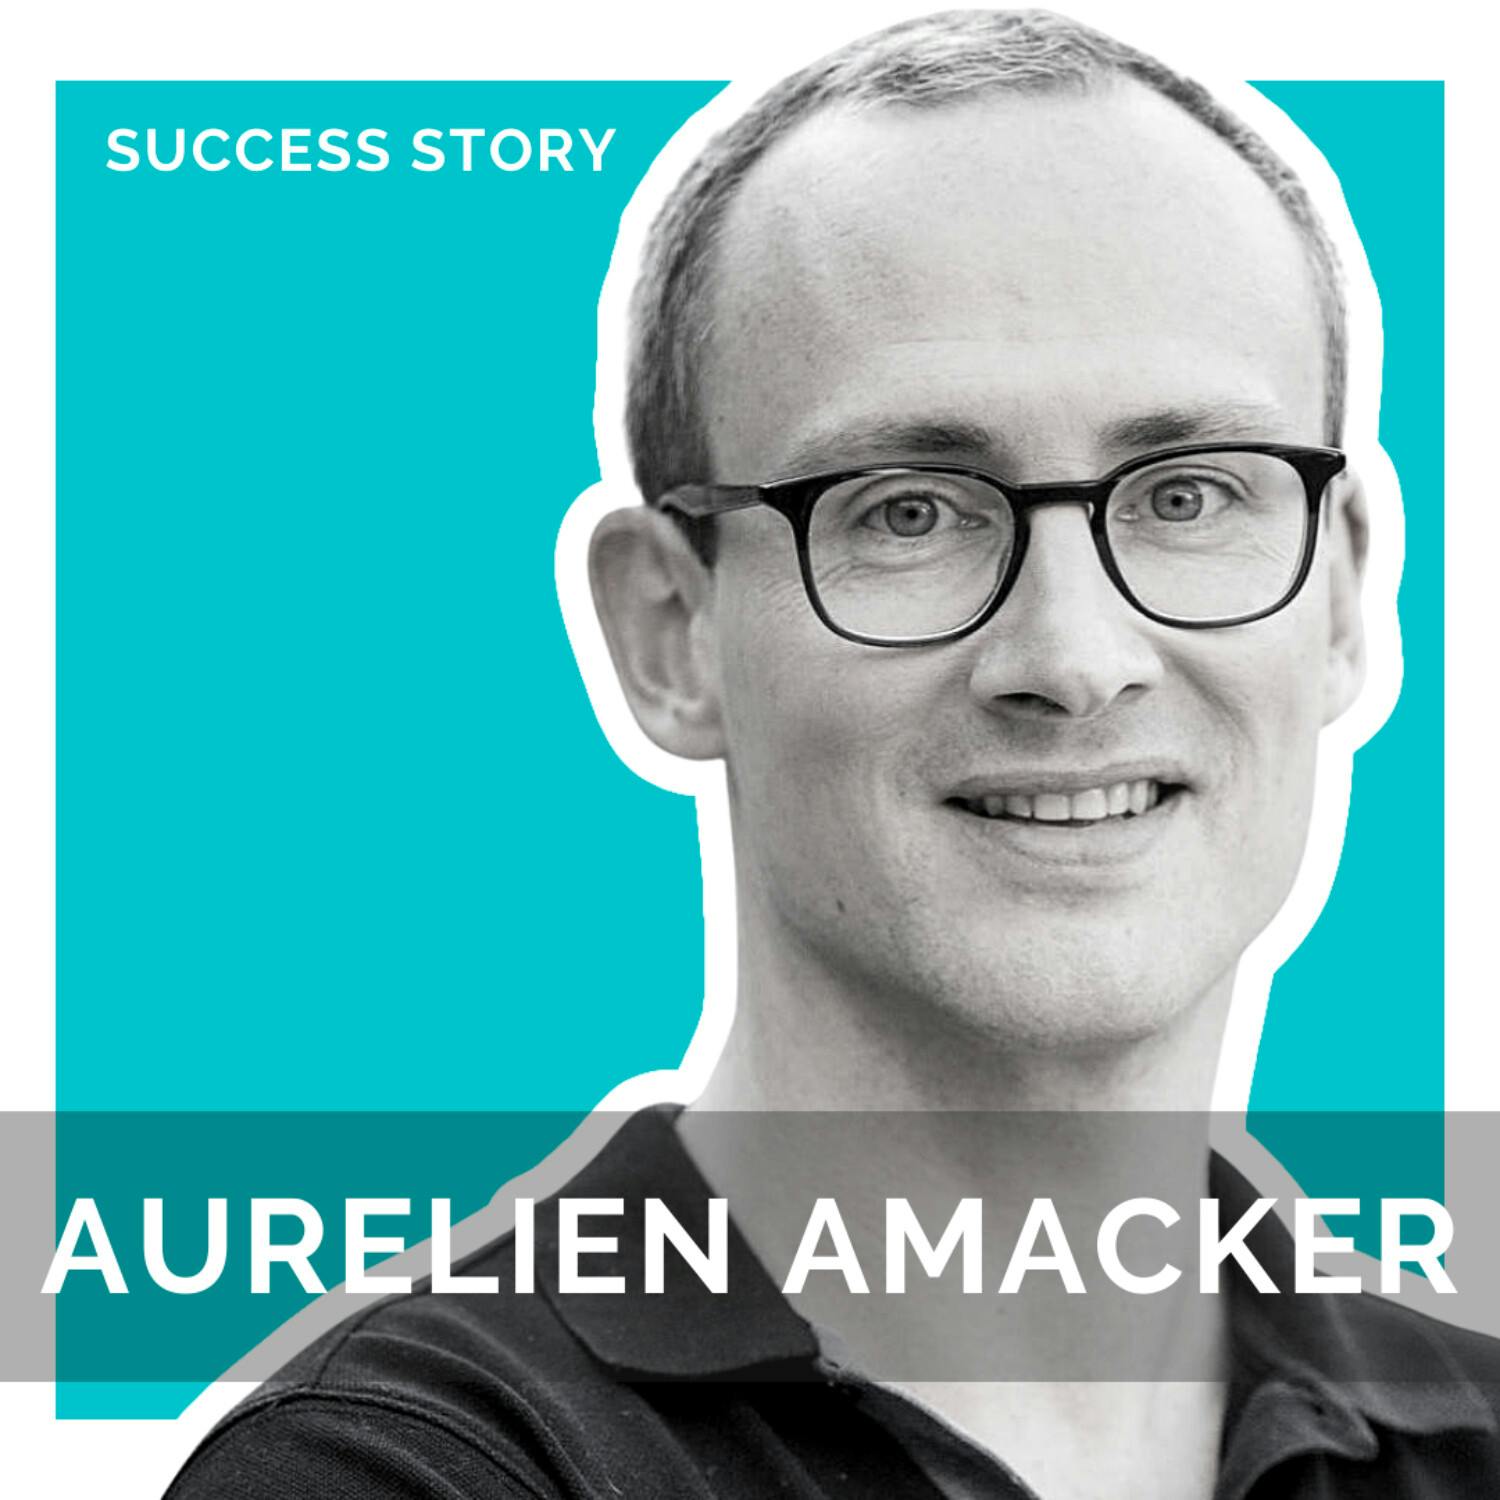 Aurelien Amacker, CEO of Systeme.io | How To Create An 8 Figure SaaS With No Technical Background